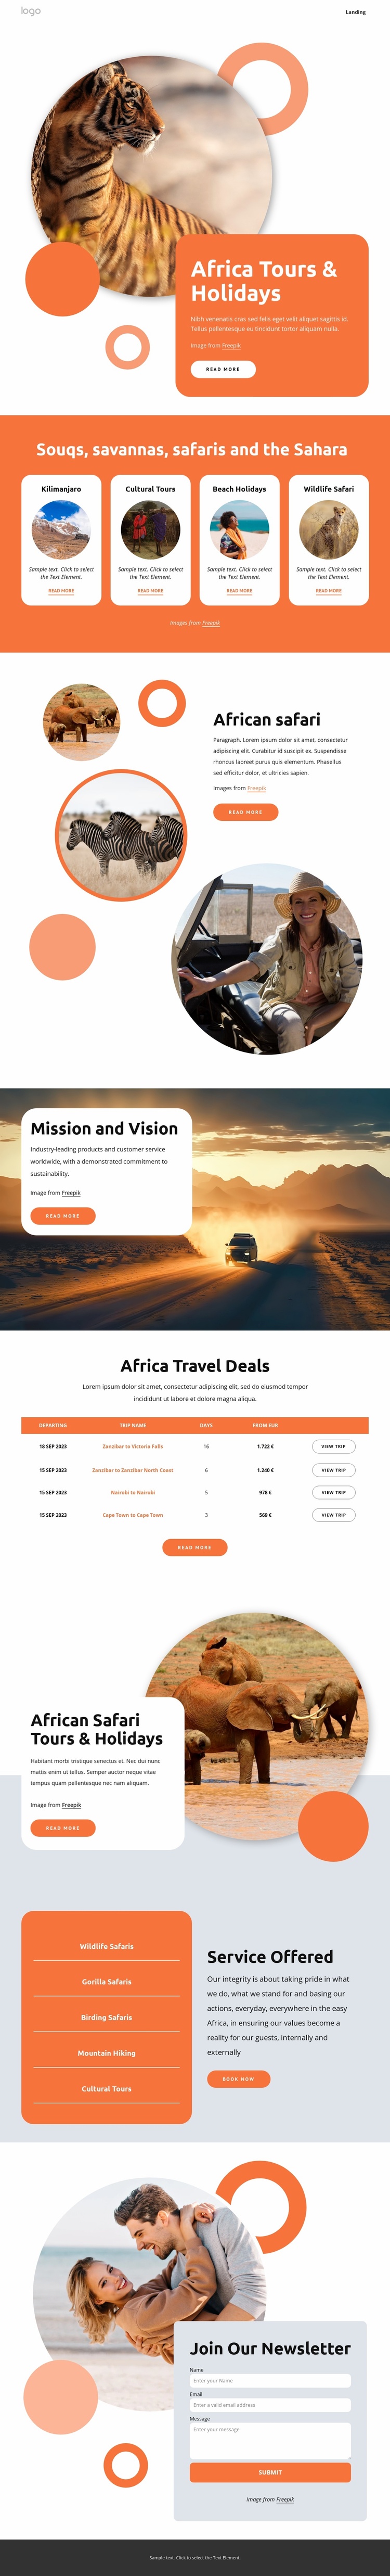 Africa tours and holidays Landing Page